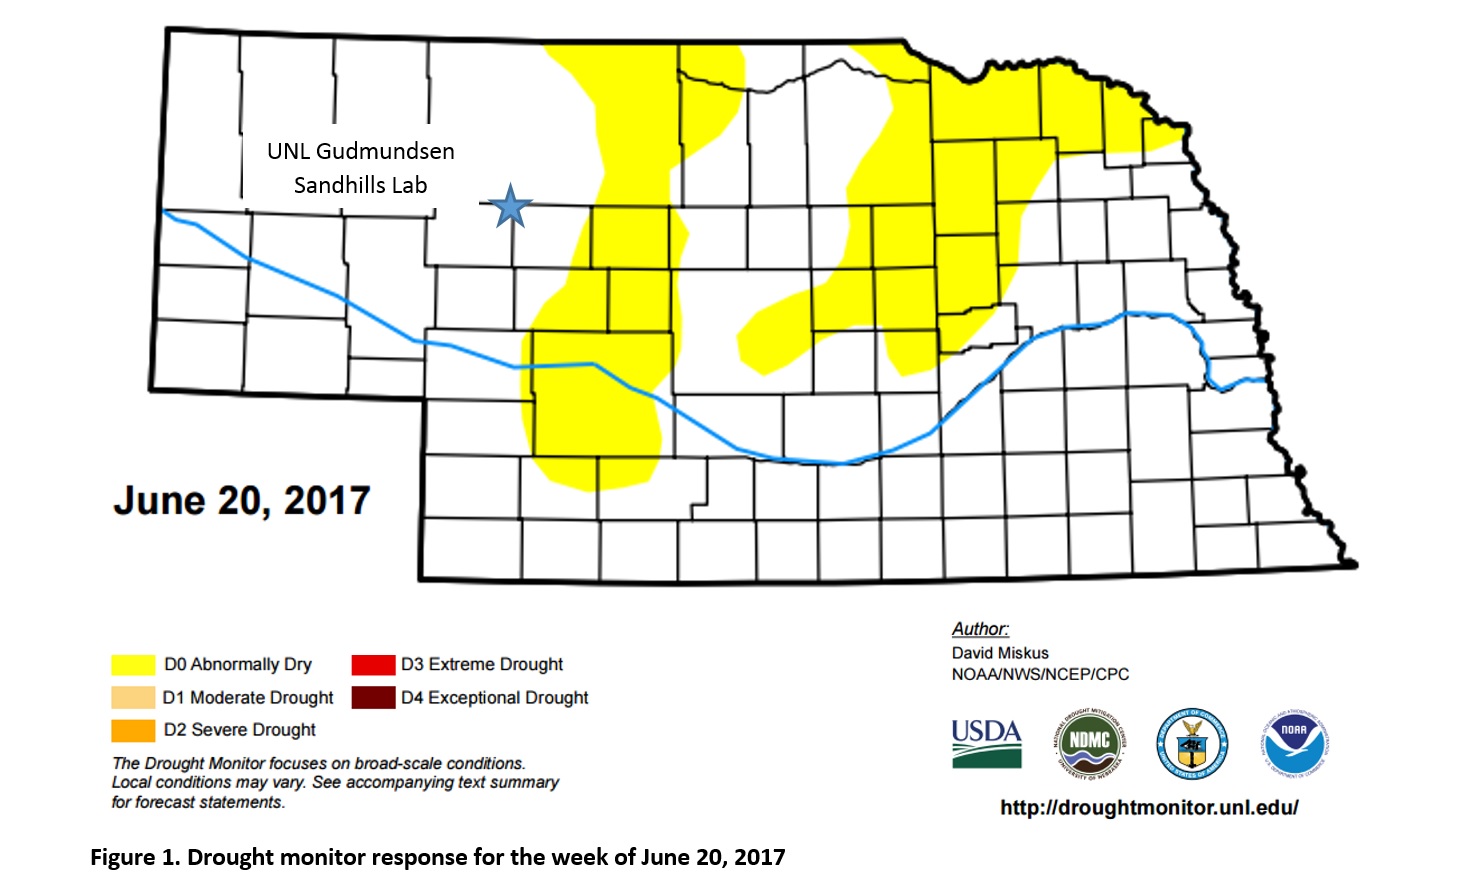 Drought monitor response for the week of June 20, 2017.